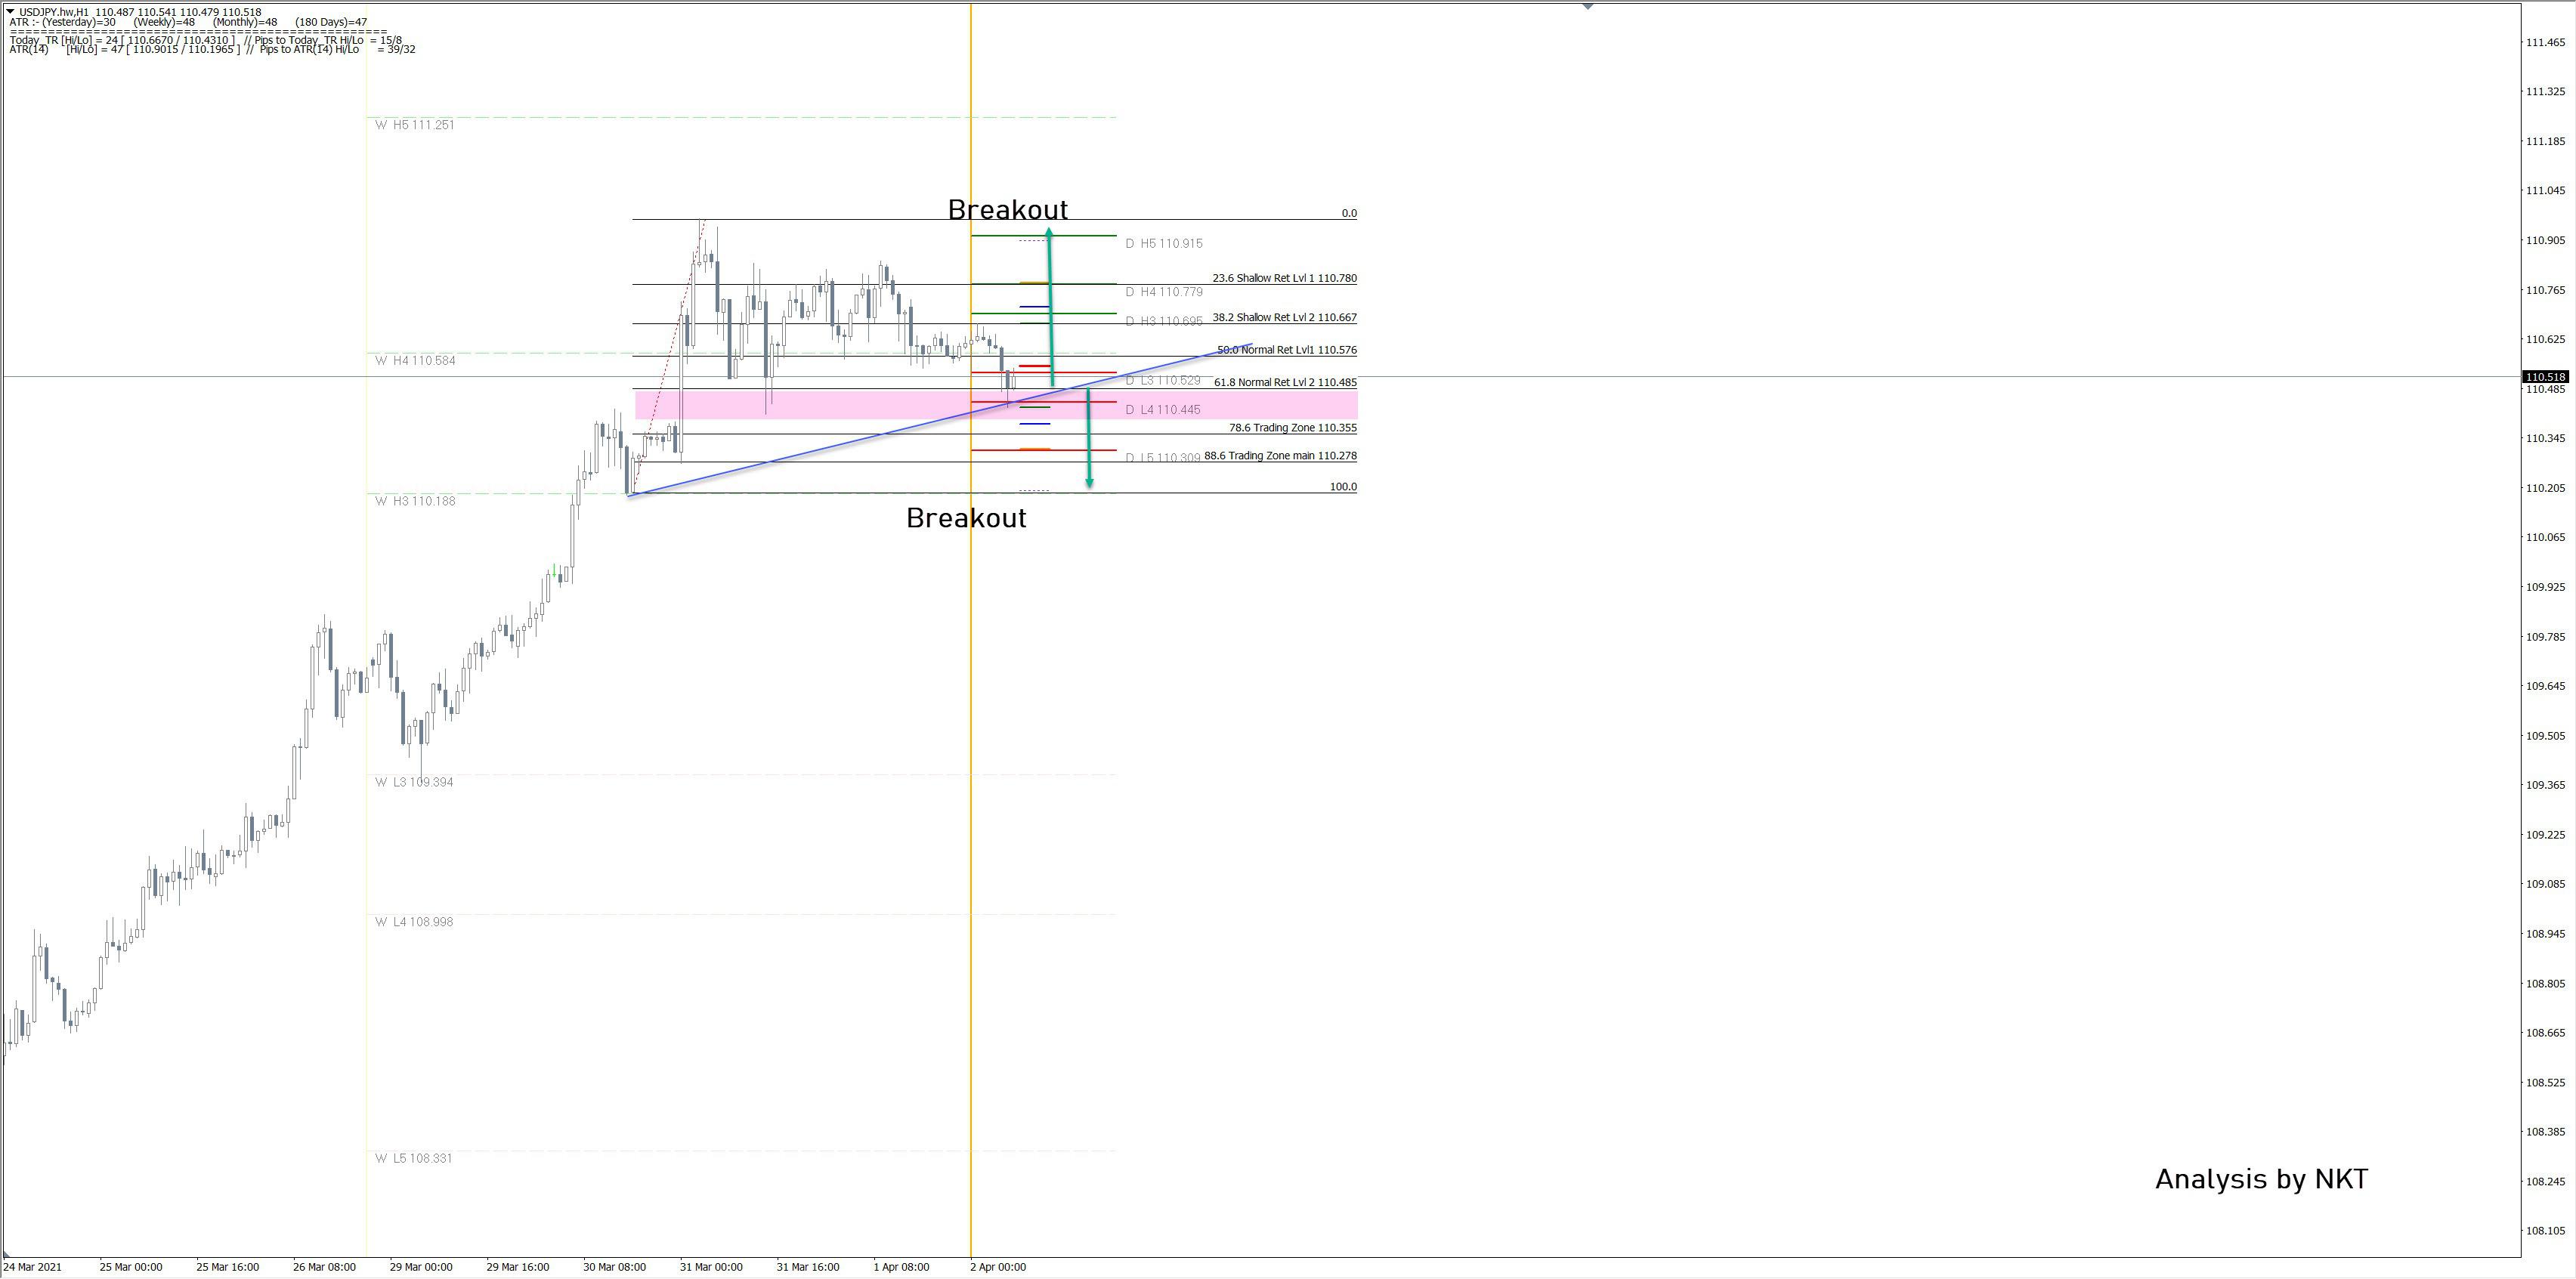 USD/JPY has formed 61.8 fib confluence prior to the NFP report